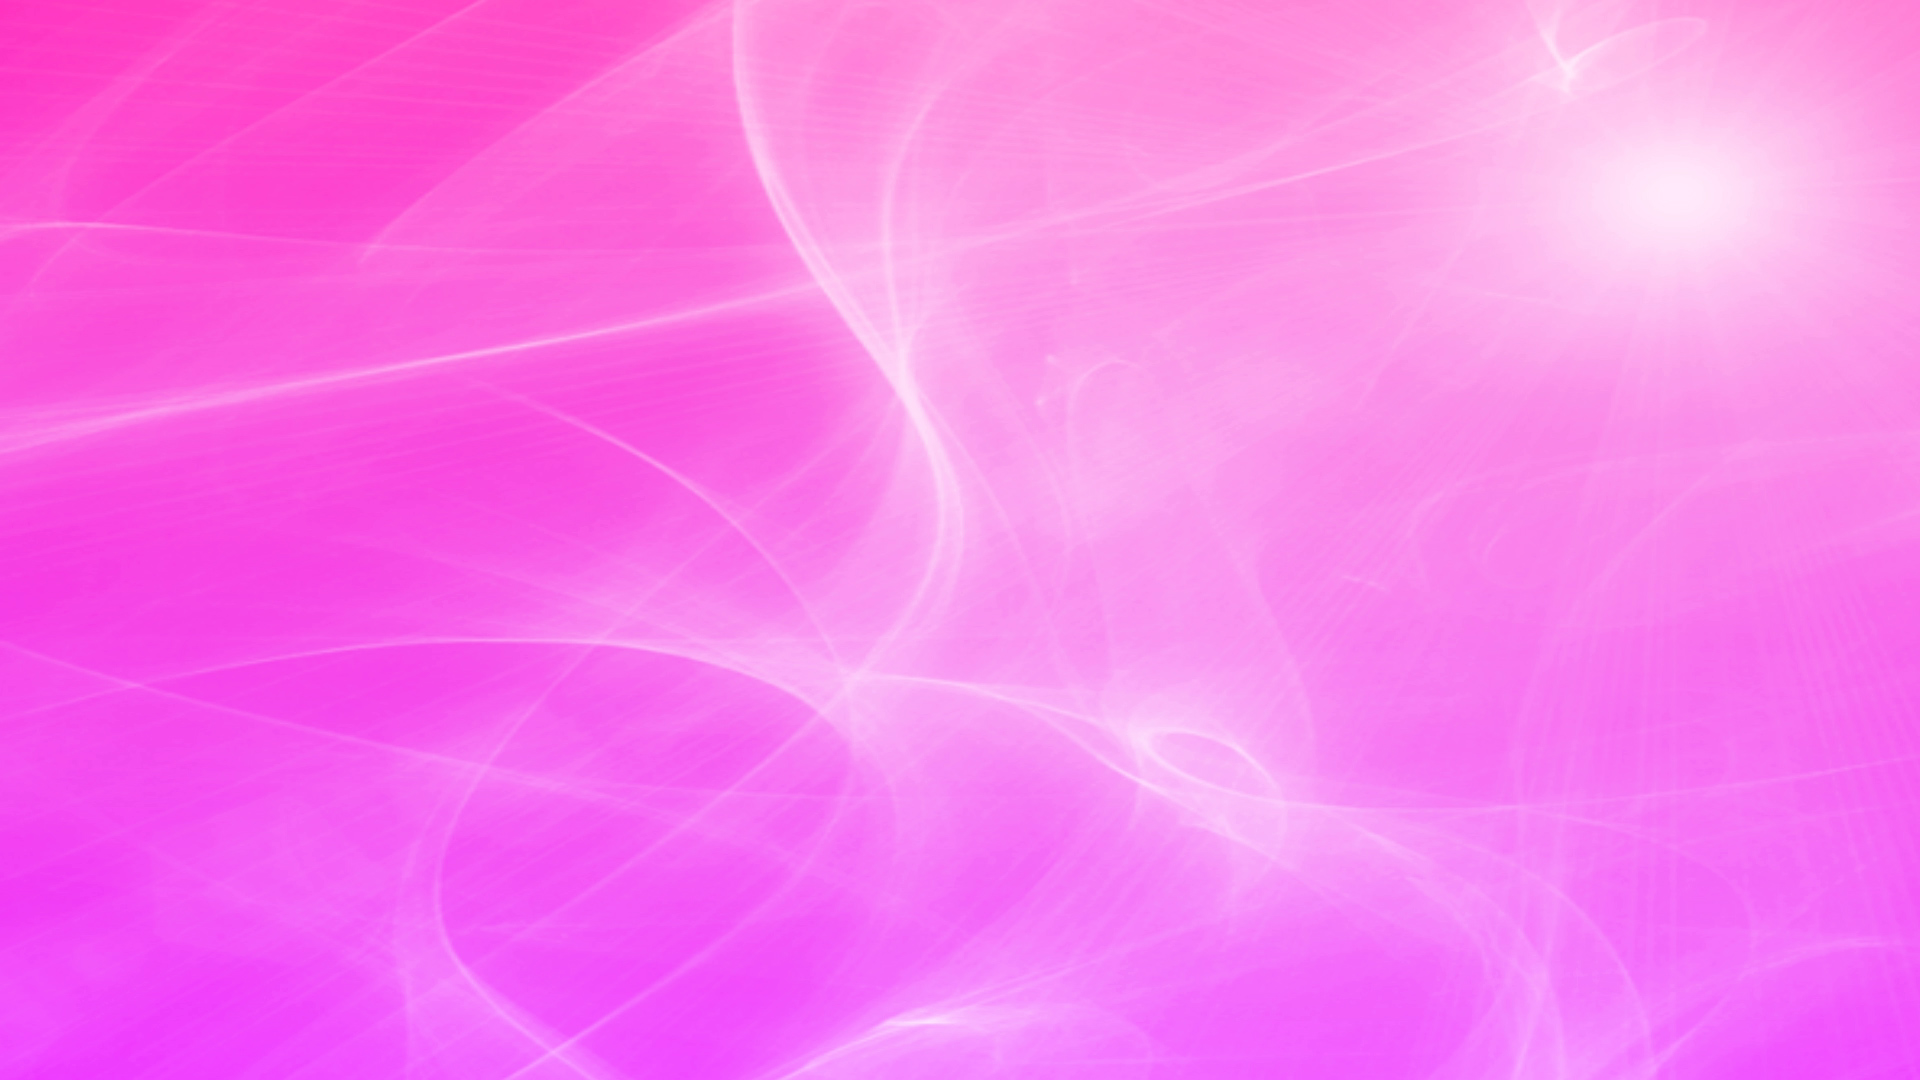 Pink Background Image High Quality Background Of